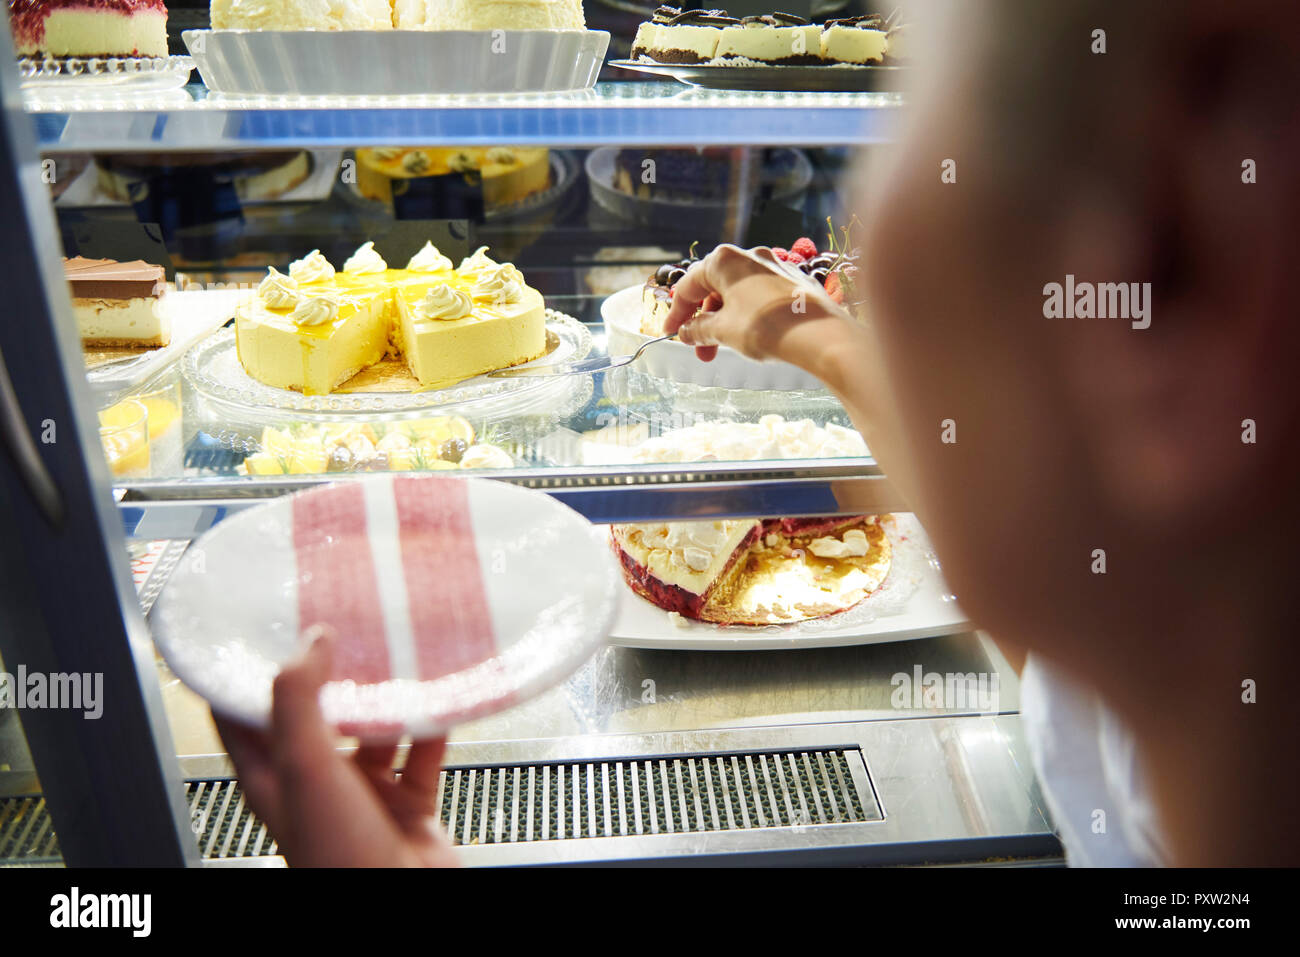 Woman working in a cafe serving a piece of cake Stock Photo